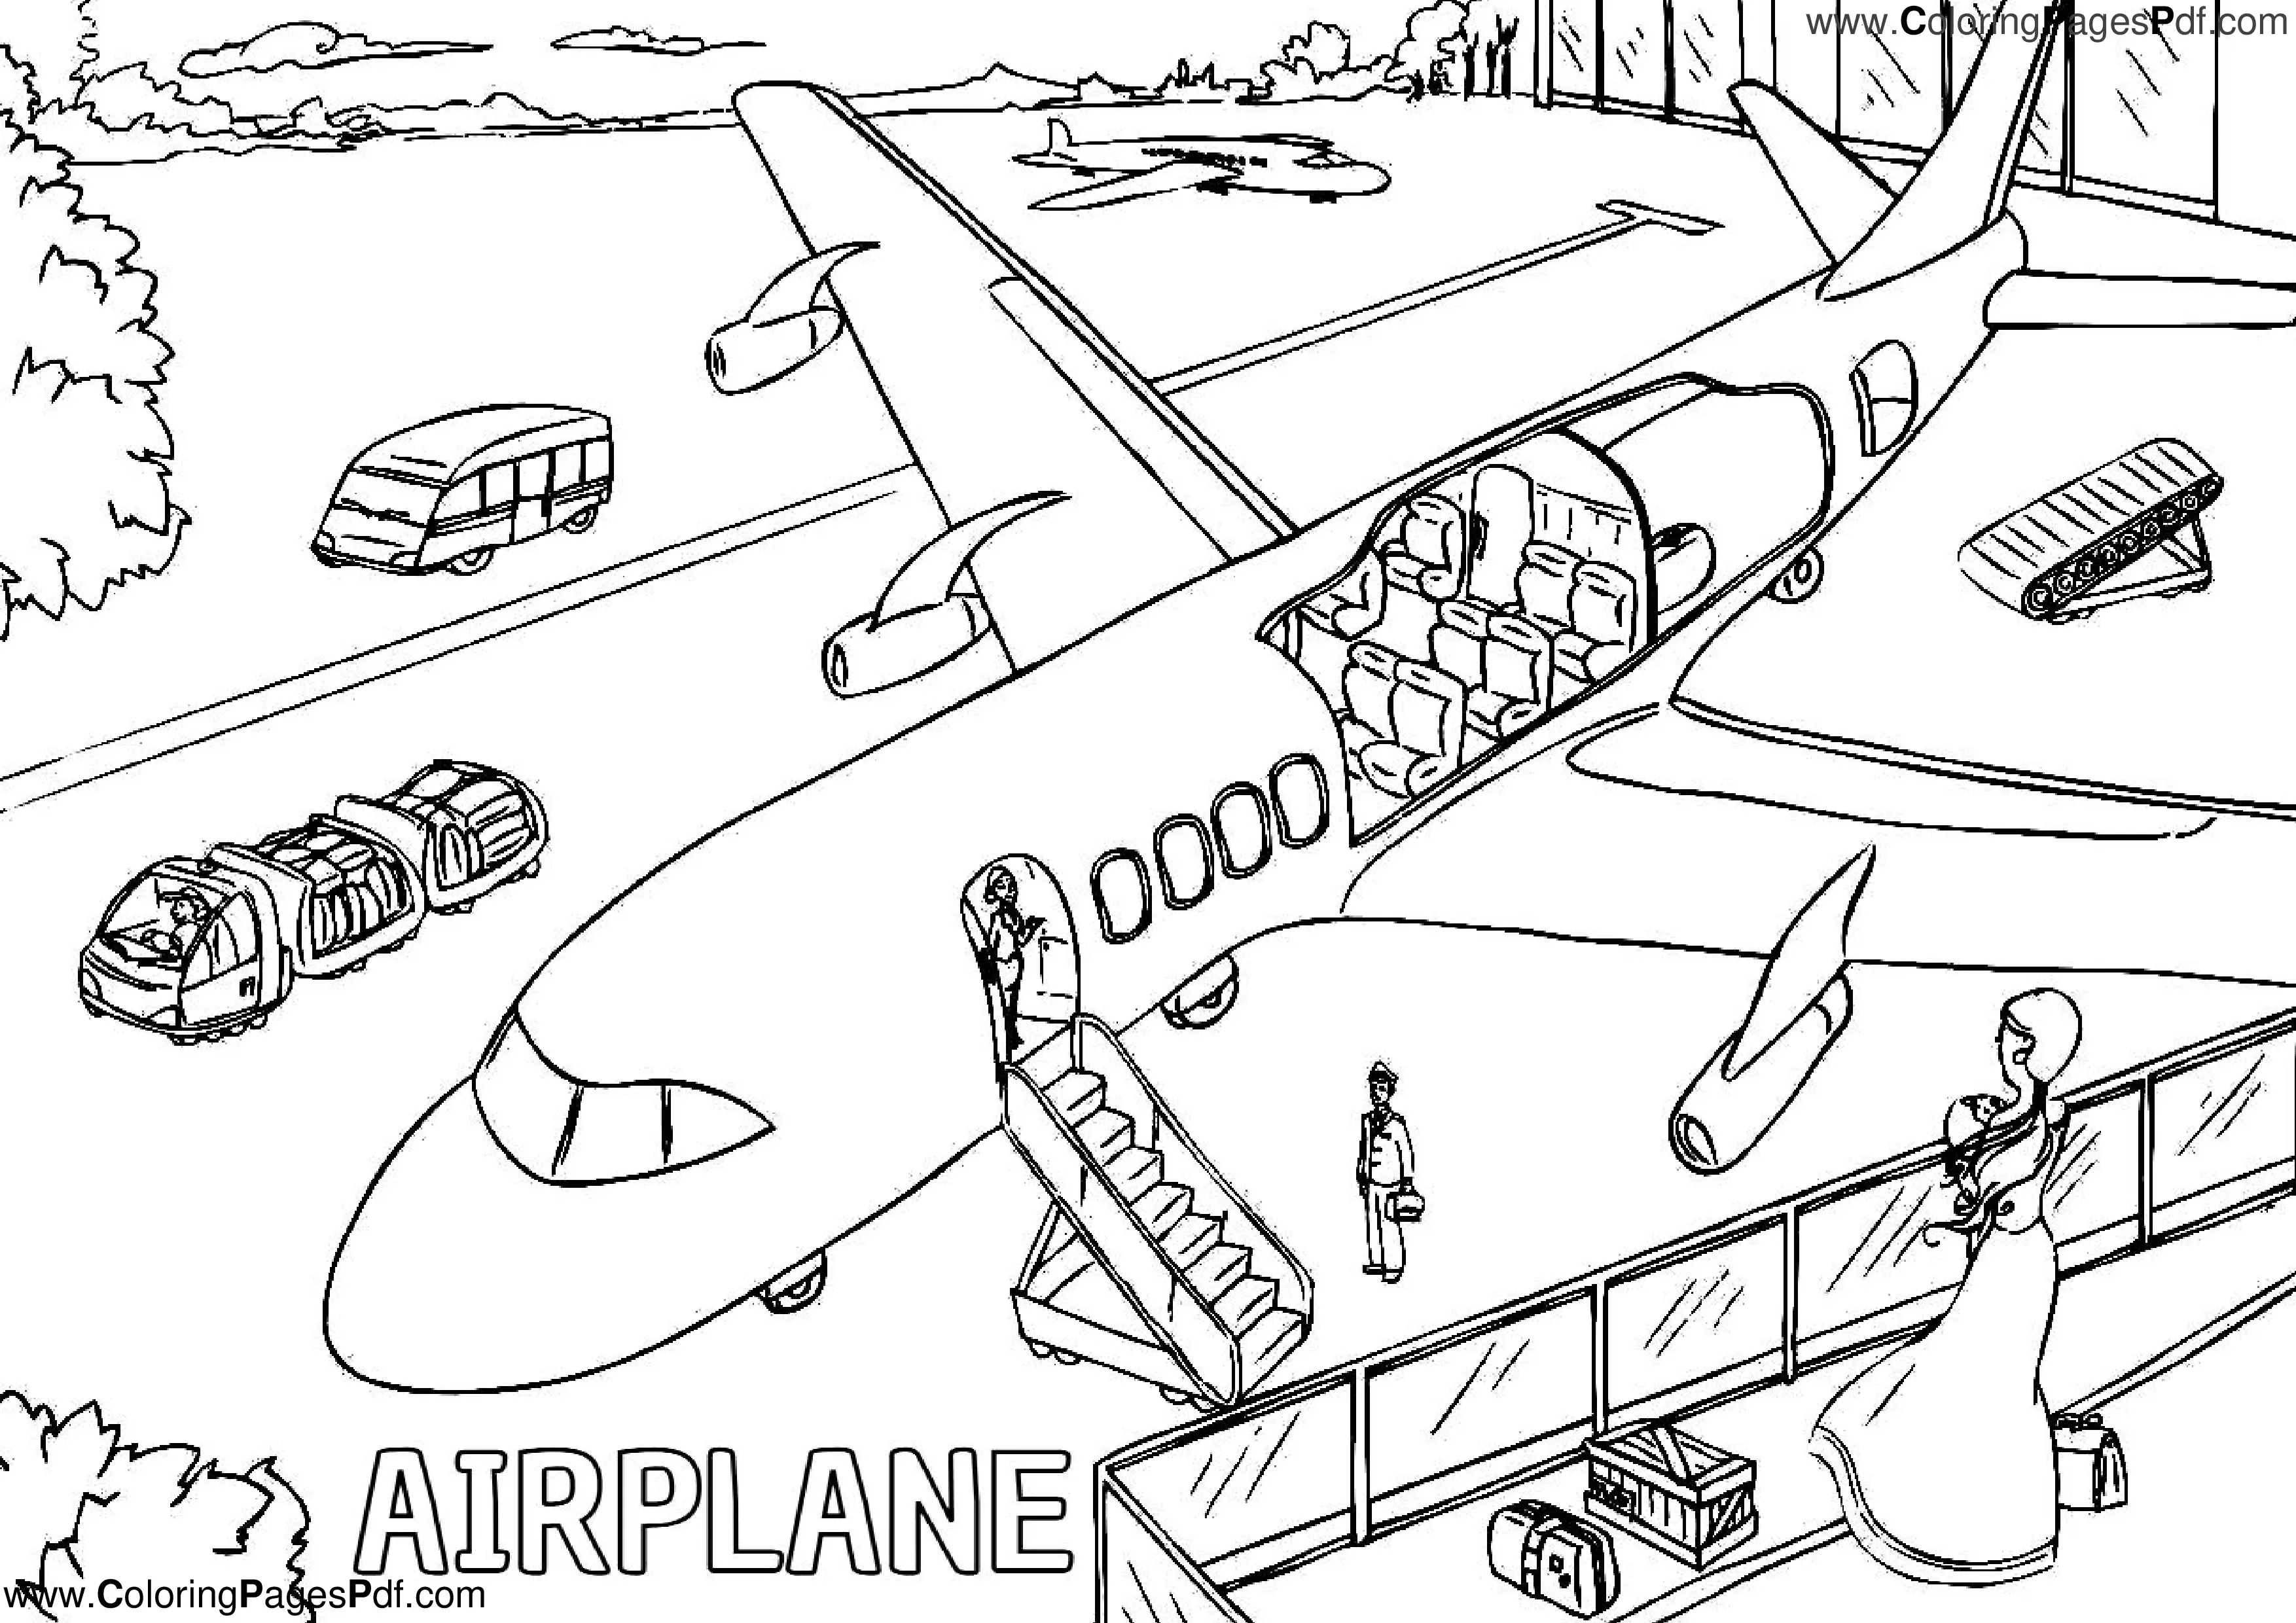 Realistic airplane coloring pages